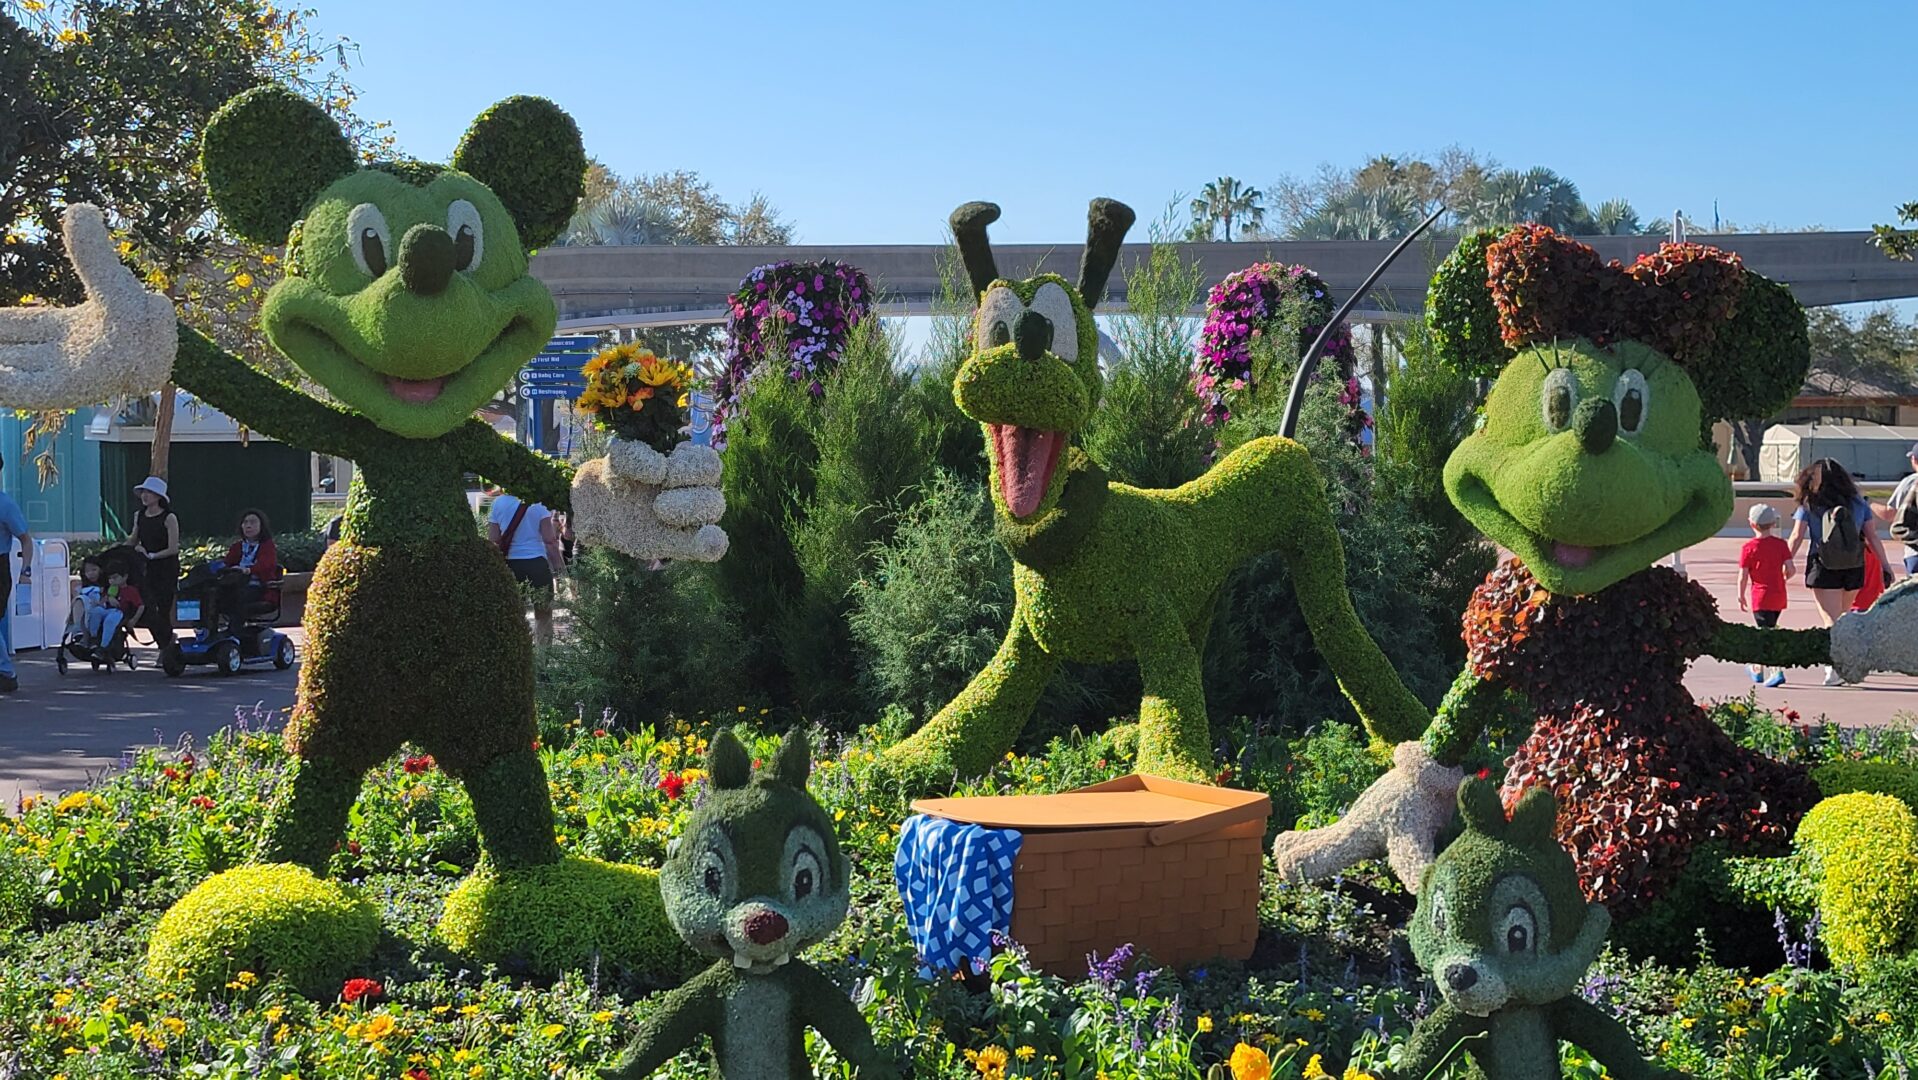 More Topiaries Arrive for the 2023 EPCOT International Flower and Garden Festival